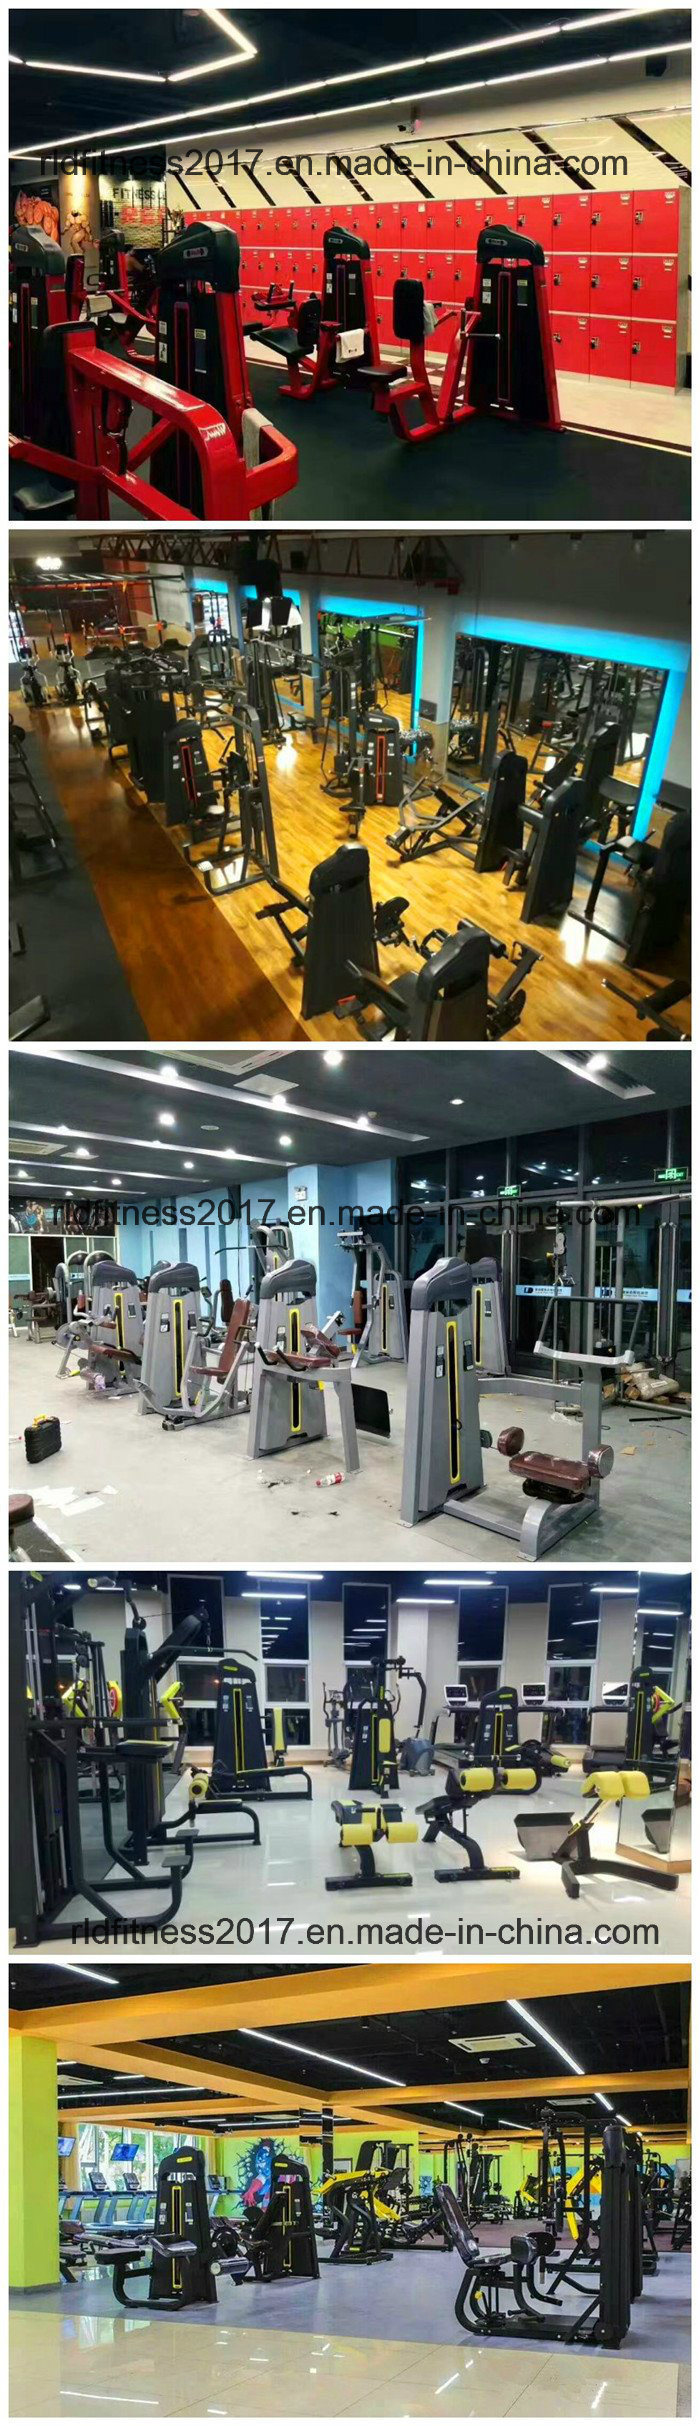 Fitness Equipment Using Gym Long Low Row, Club Exercise Sports Machine